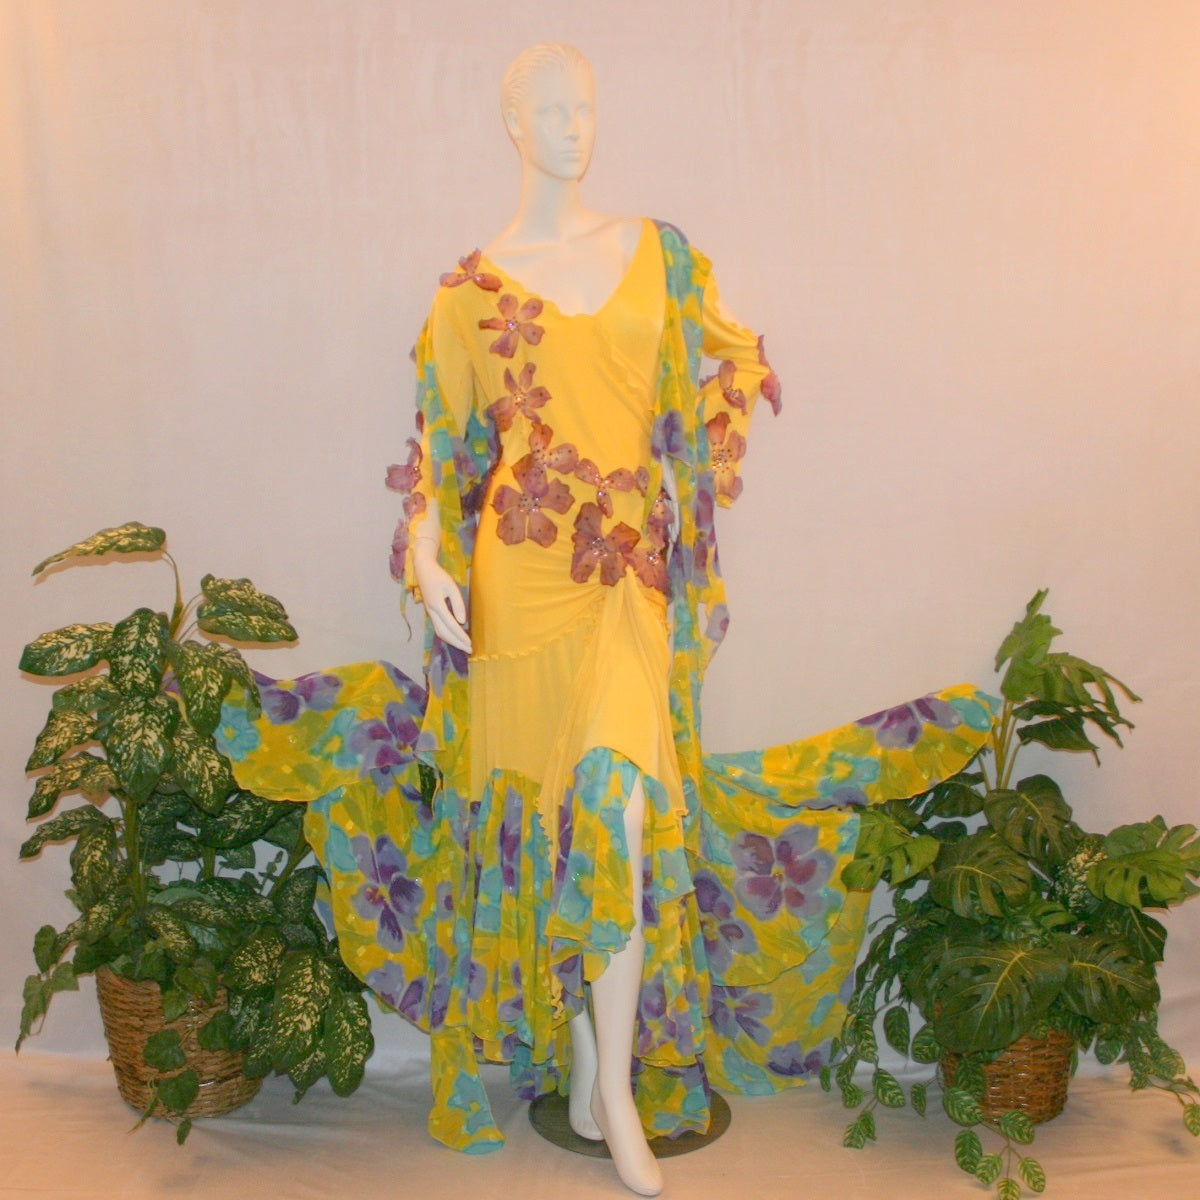 Crystal's Creations Yellow ballroom dress created of luxurious yellow slinky with yards of flower printed textured chiffon of yellow, orchids & blues is embellished with deep orchid silk flowers that have rhinestone work in shades of orchid.